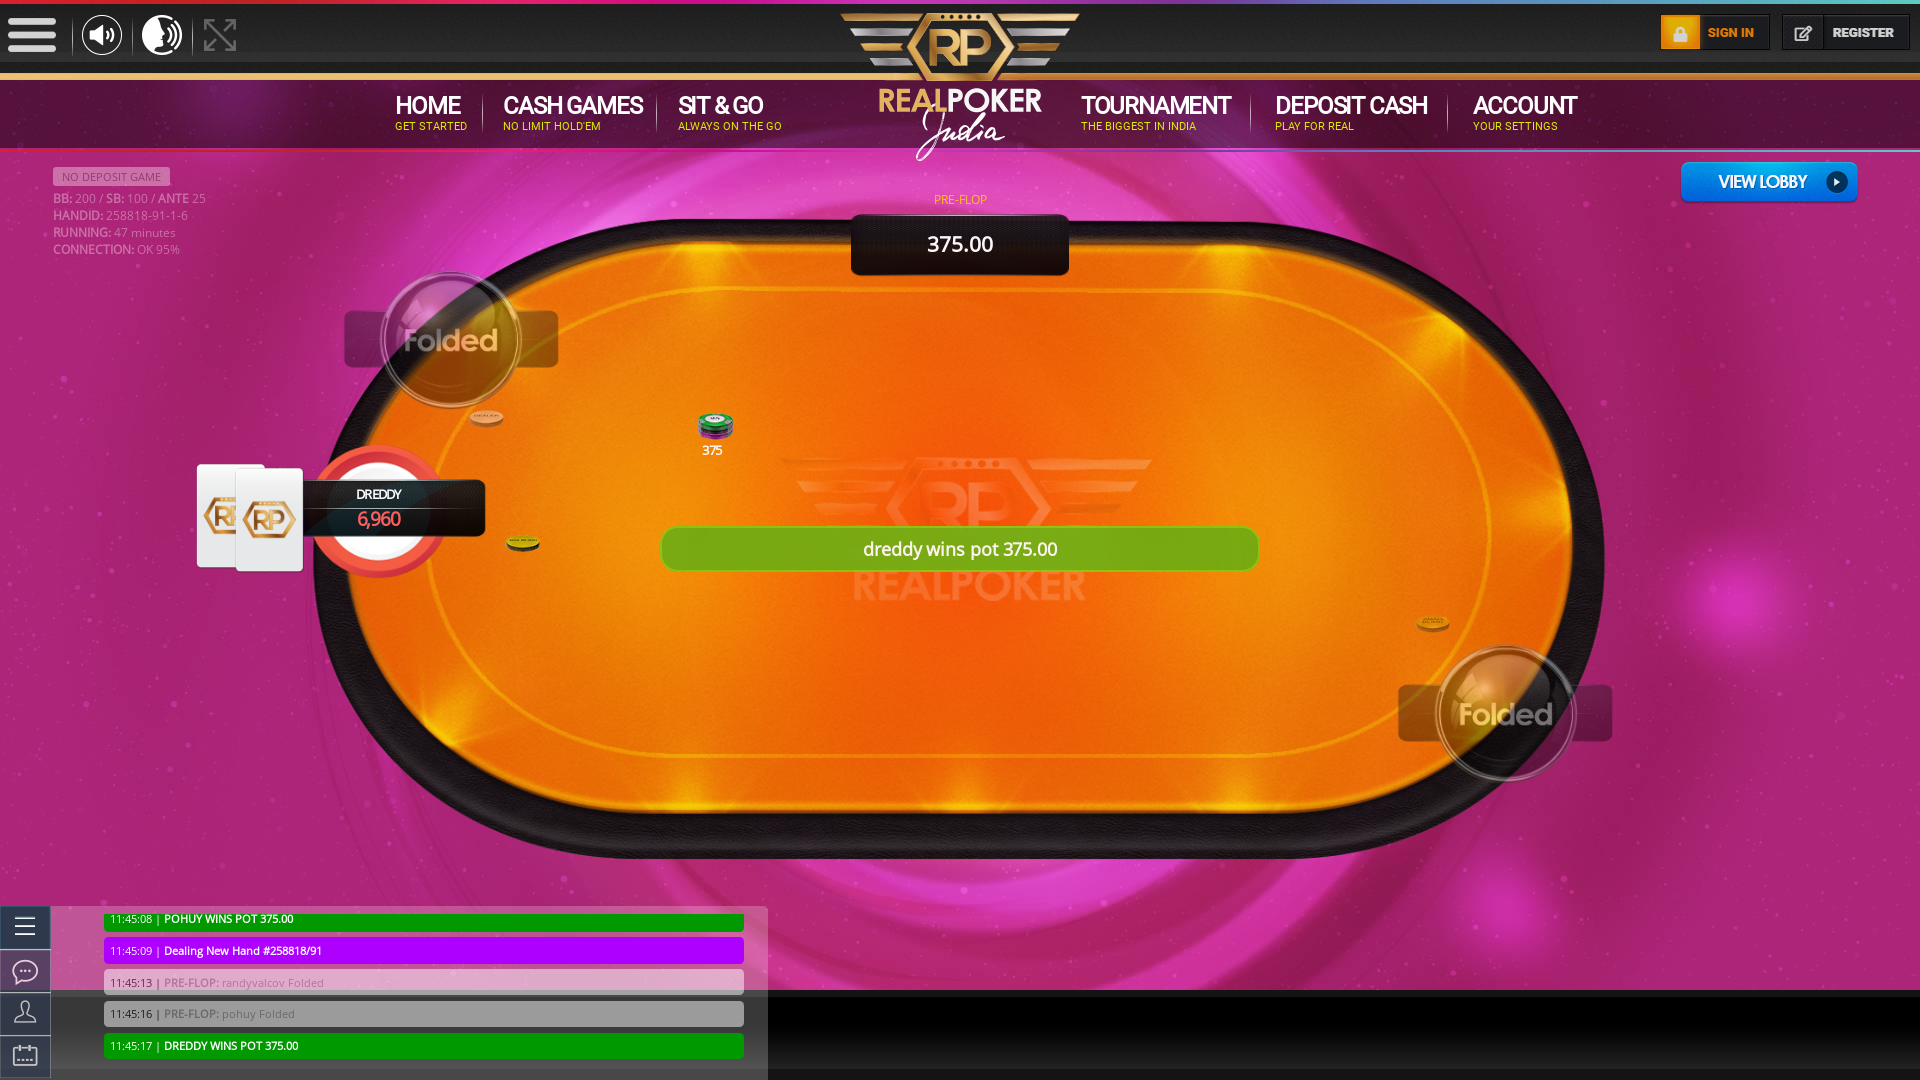 Indian online poker on a 10 player table in the 47th minute match up